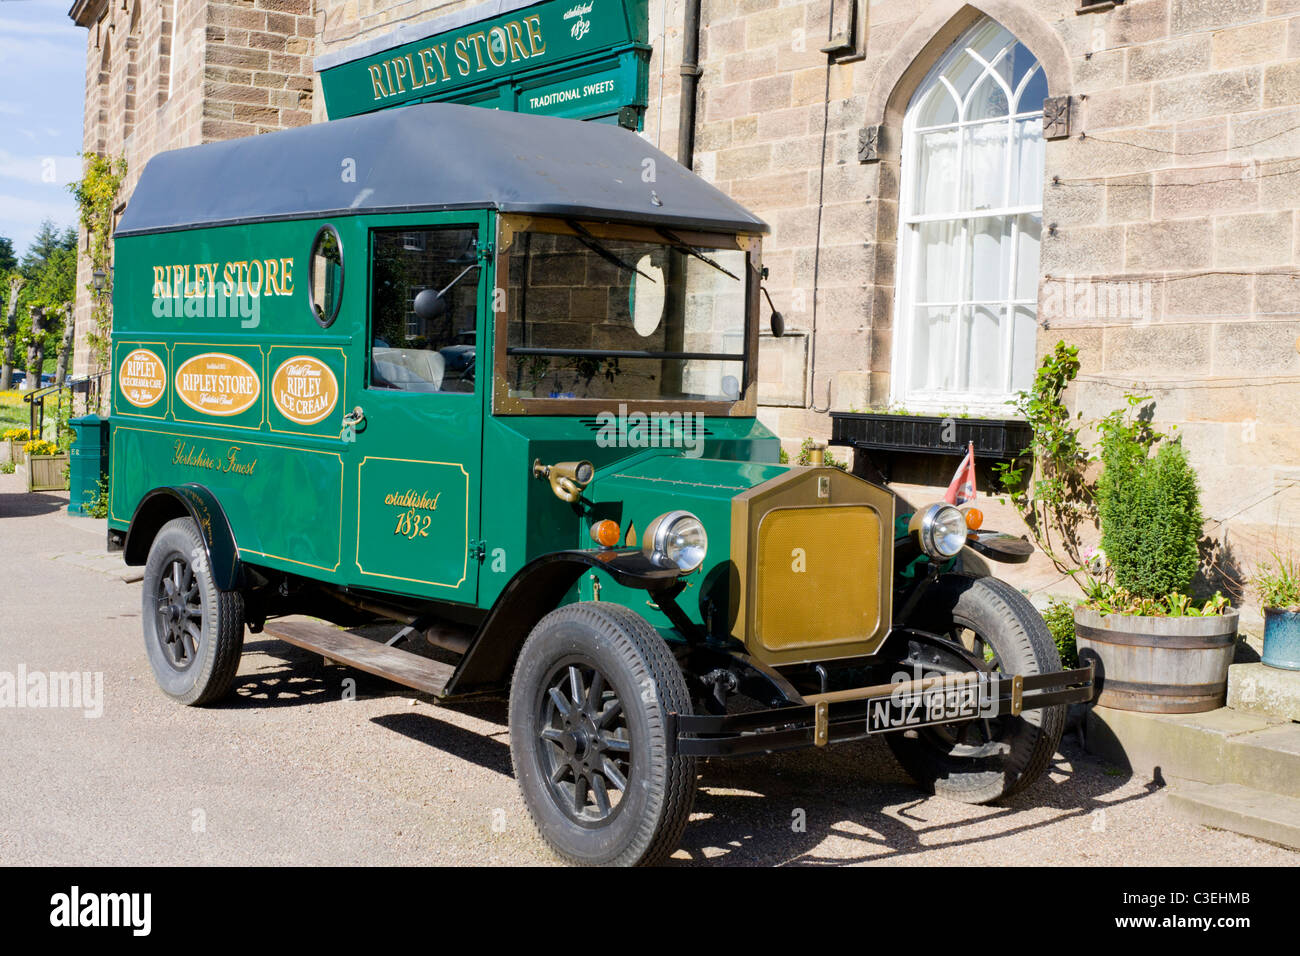 Old style van for Ripley Stores, Ripley North Yorkshire UK Stock Photo -  Alamy